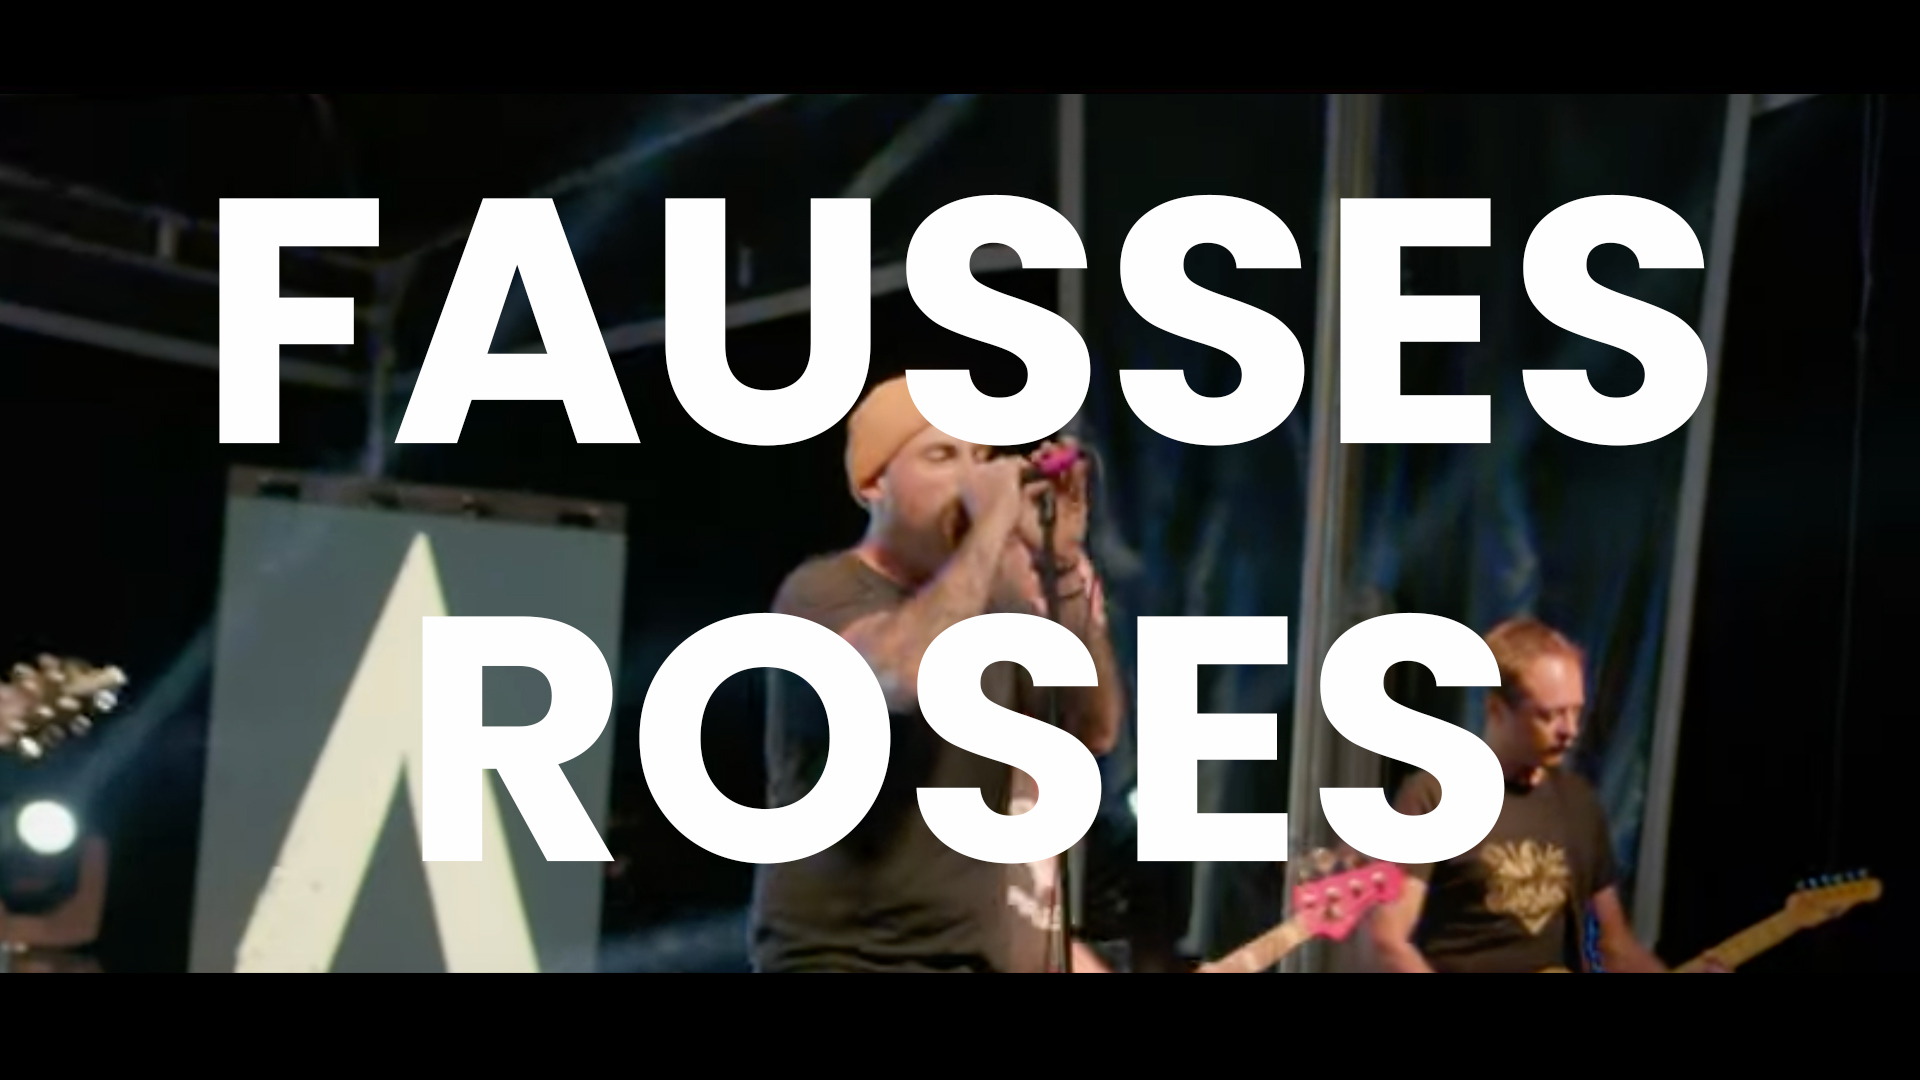 FAUSSES ROSES